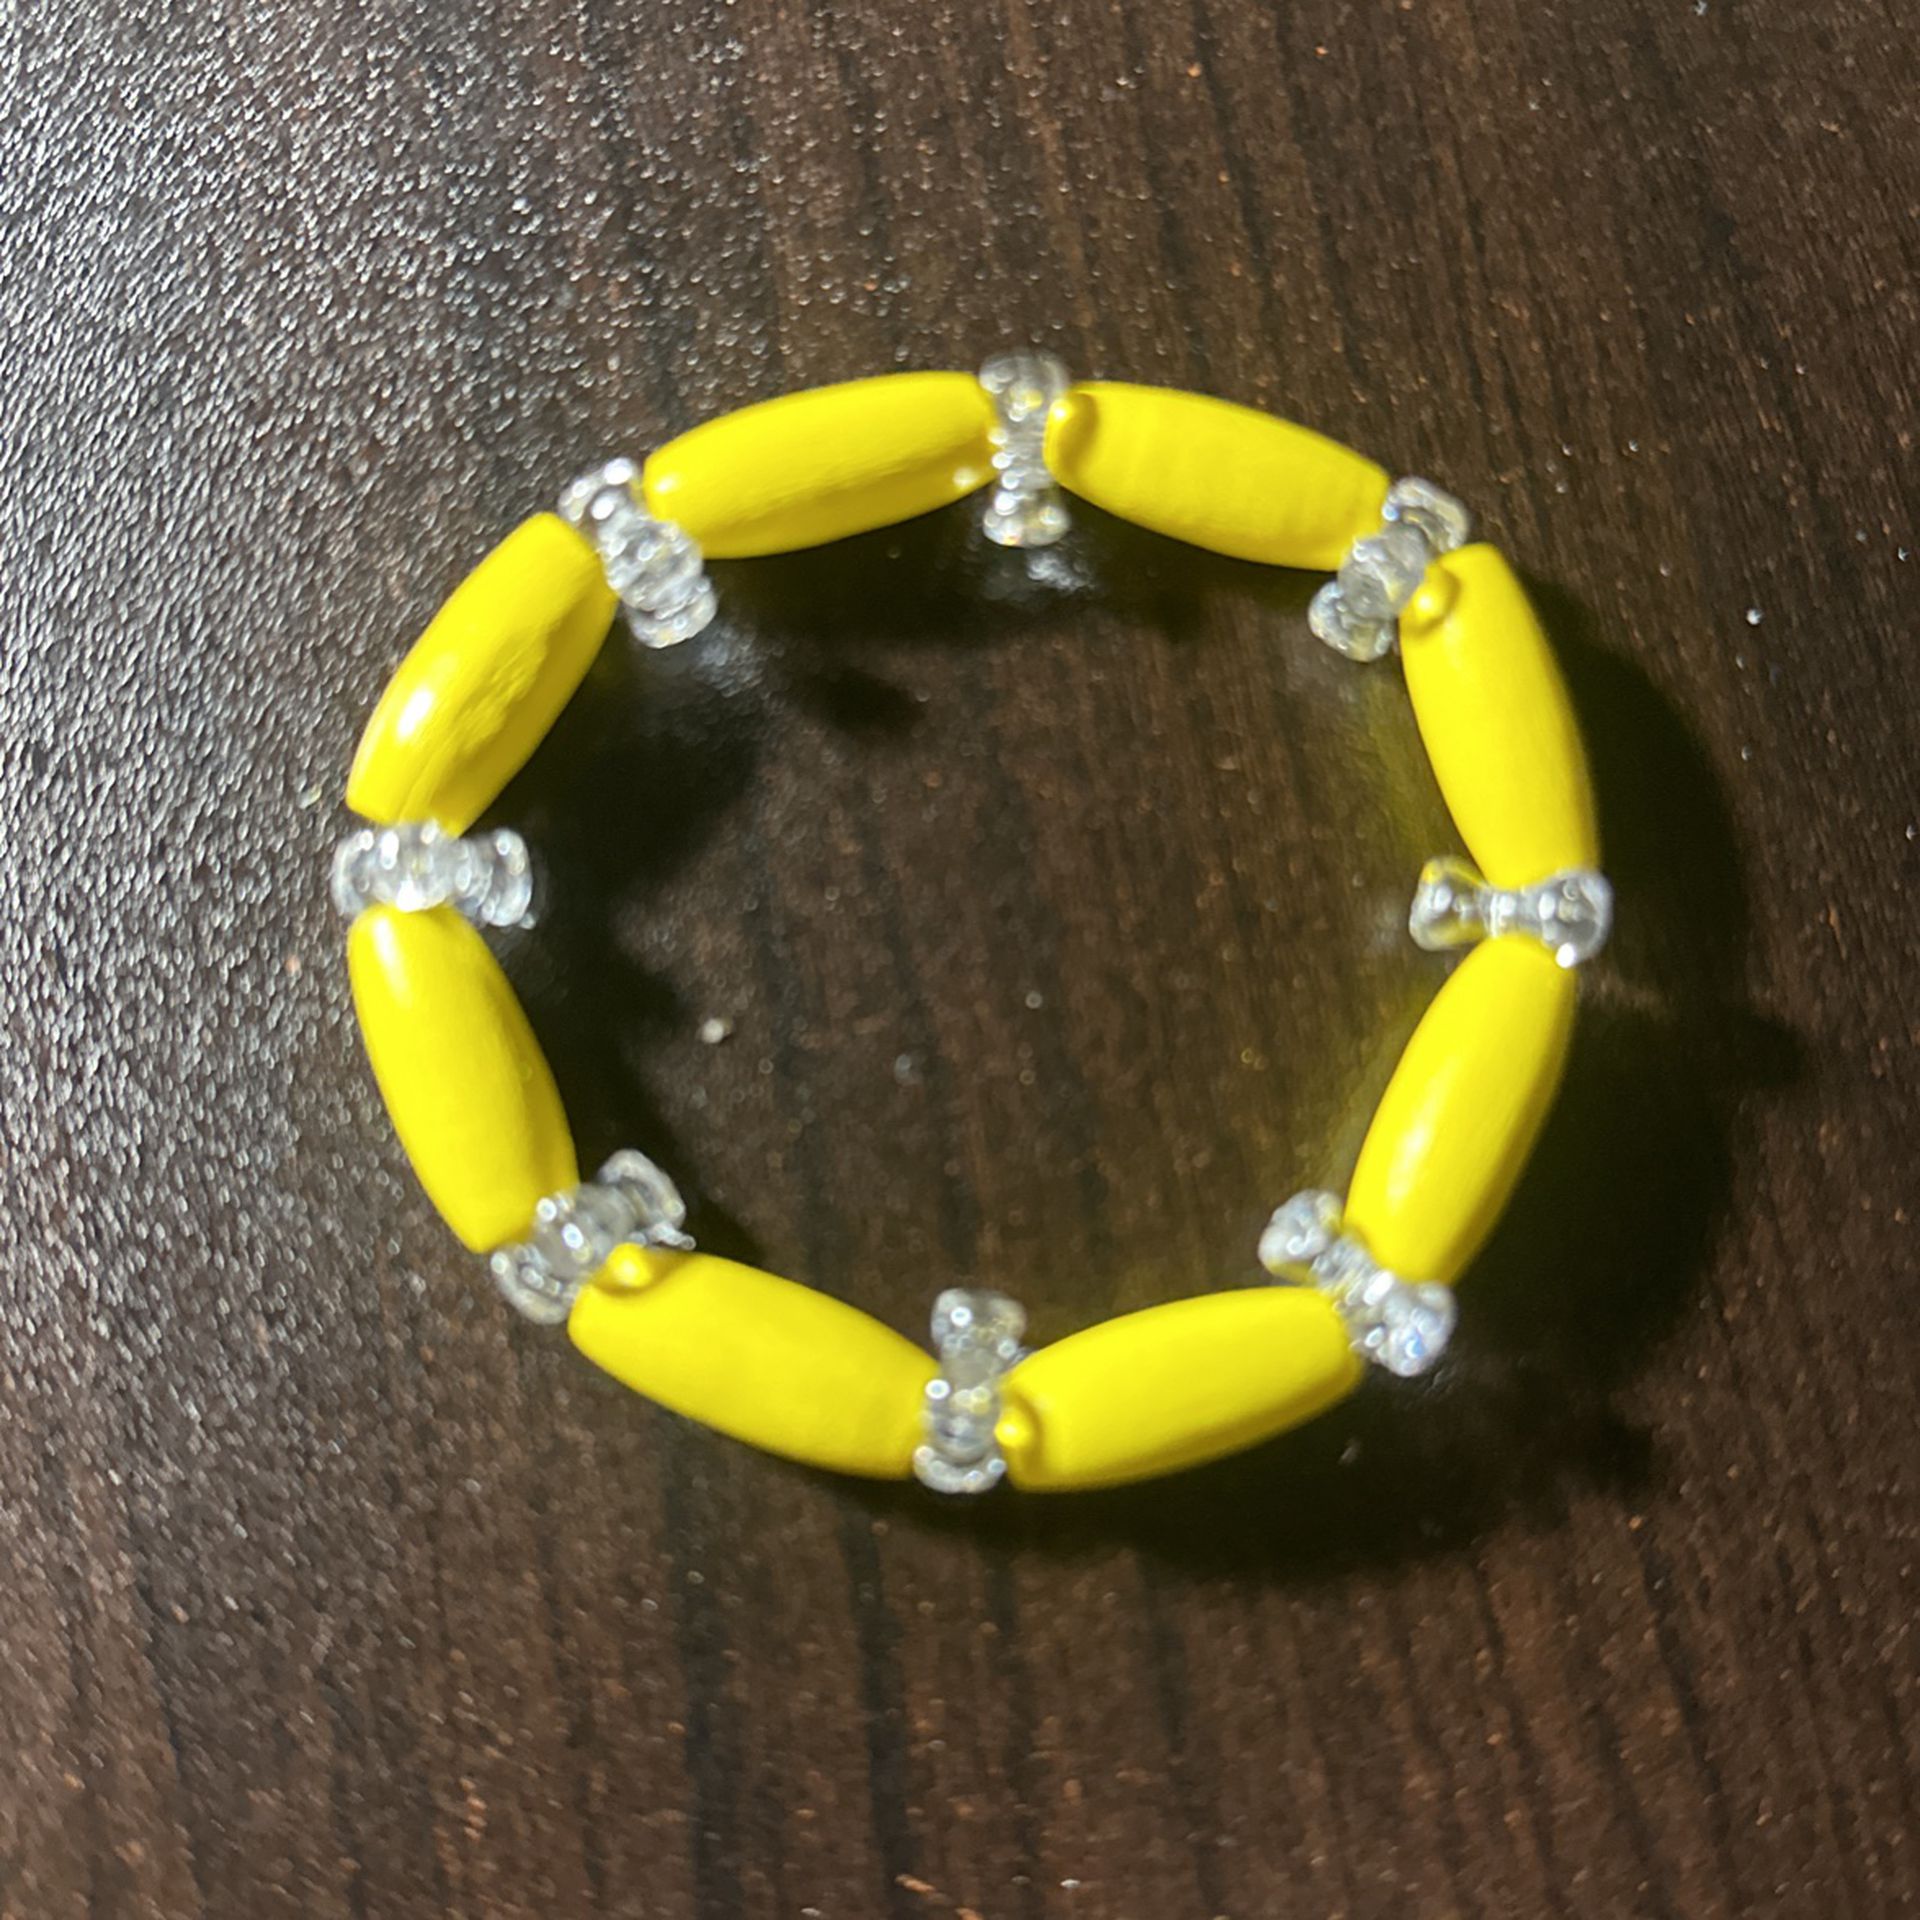 Yellow, Long Wood Beads With A Clear Star